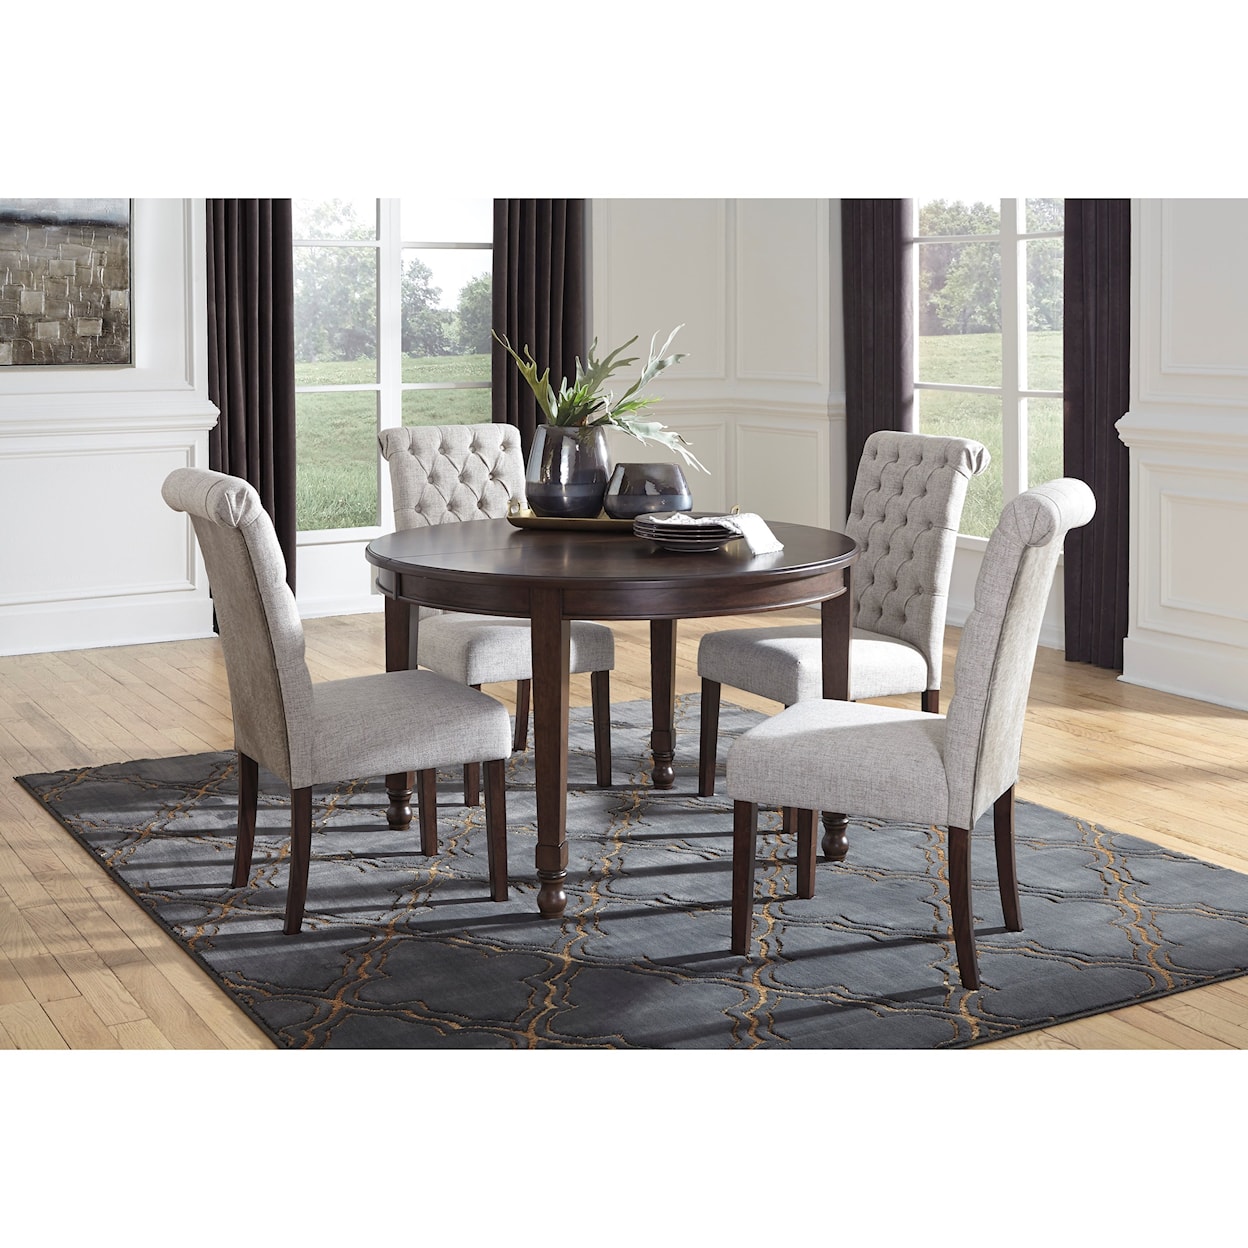 Ashley Signature Design Adinton 5-Piece Table and Chair Set